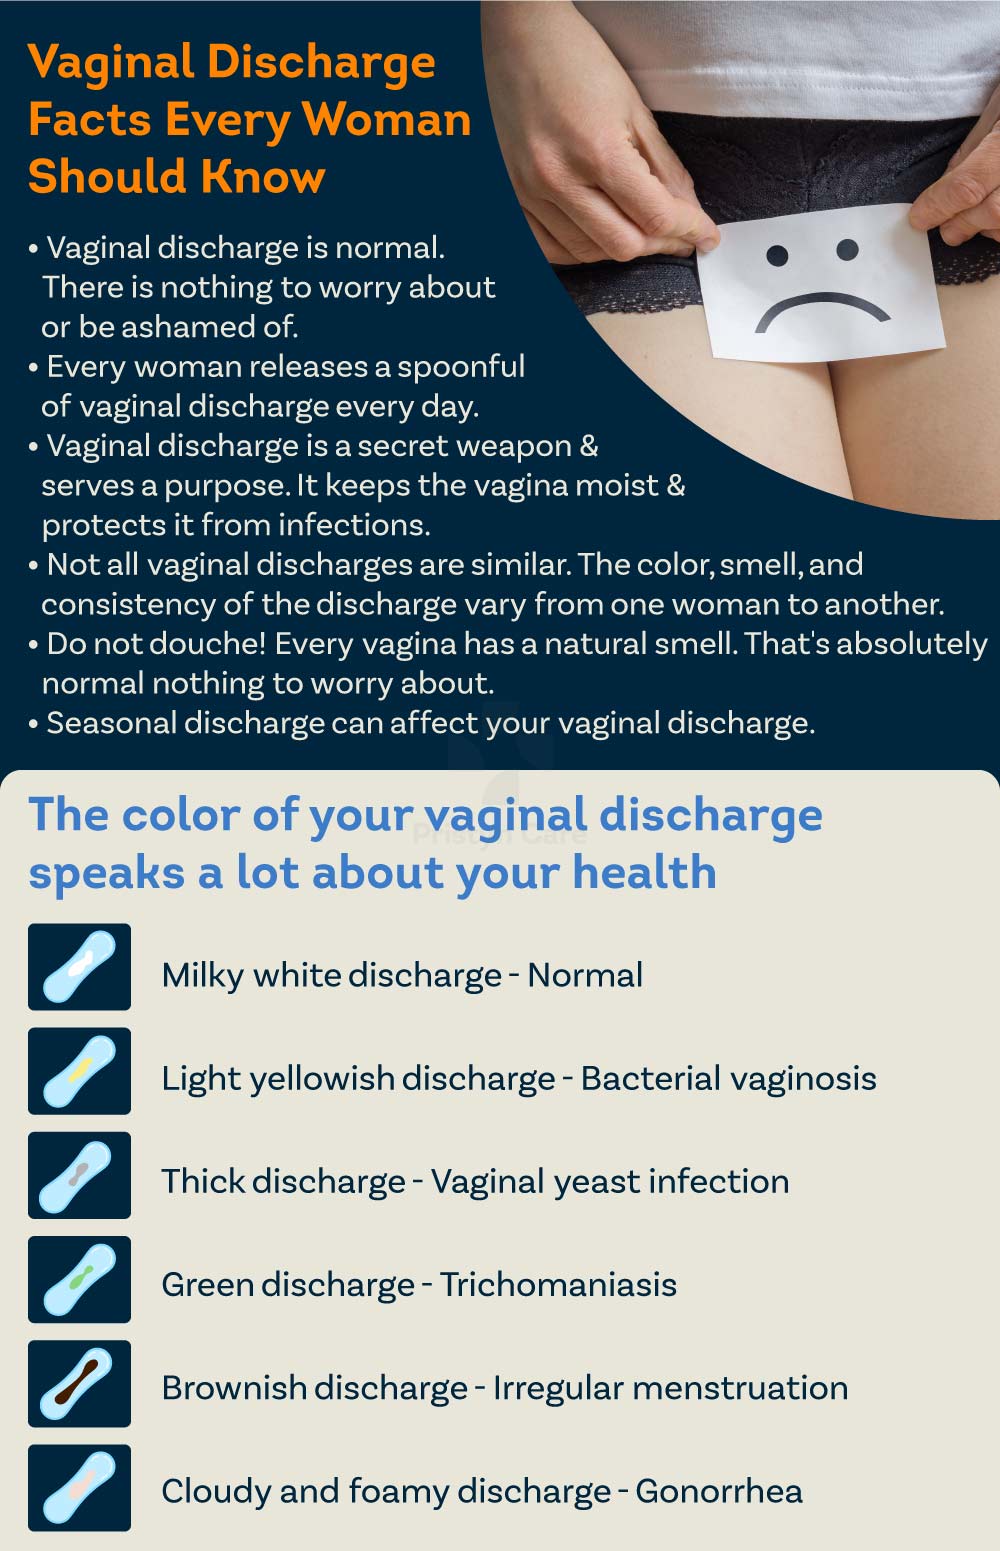 Facts about vaginal discharge